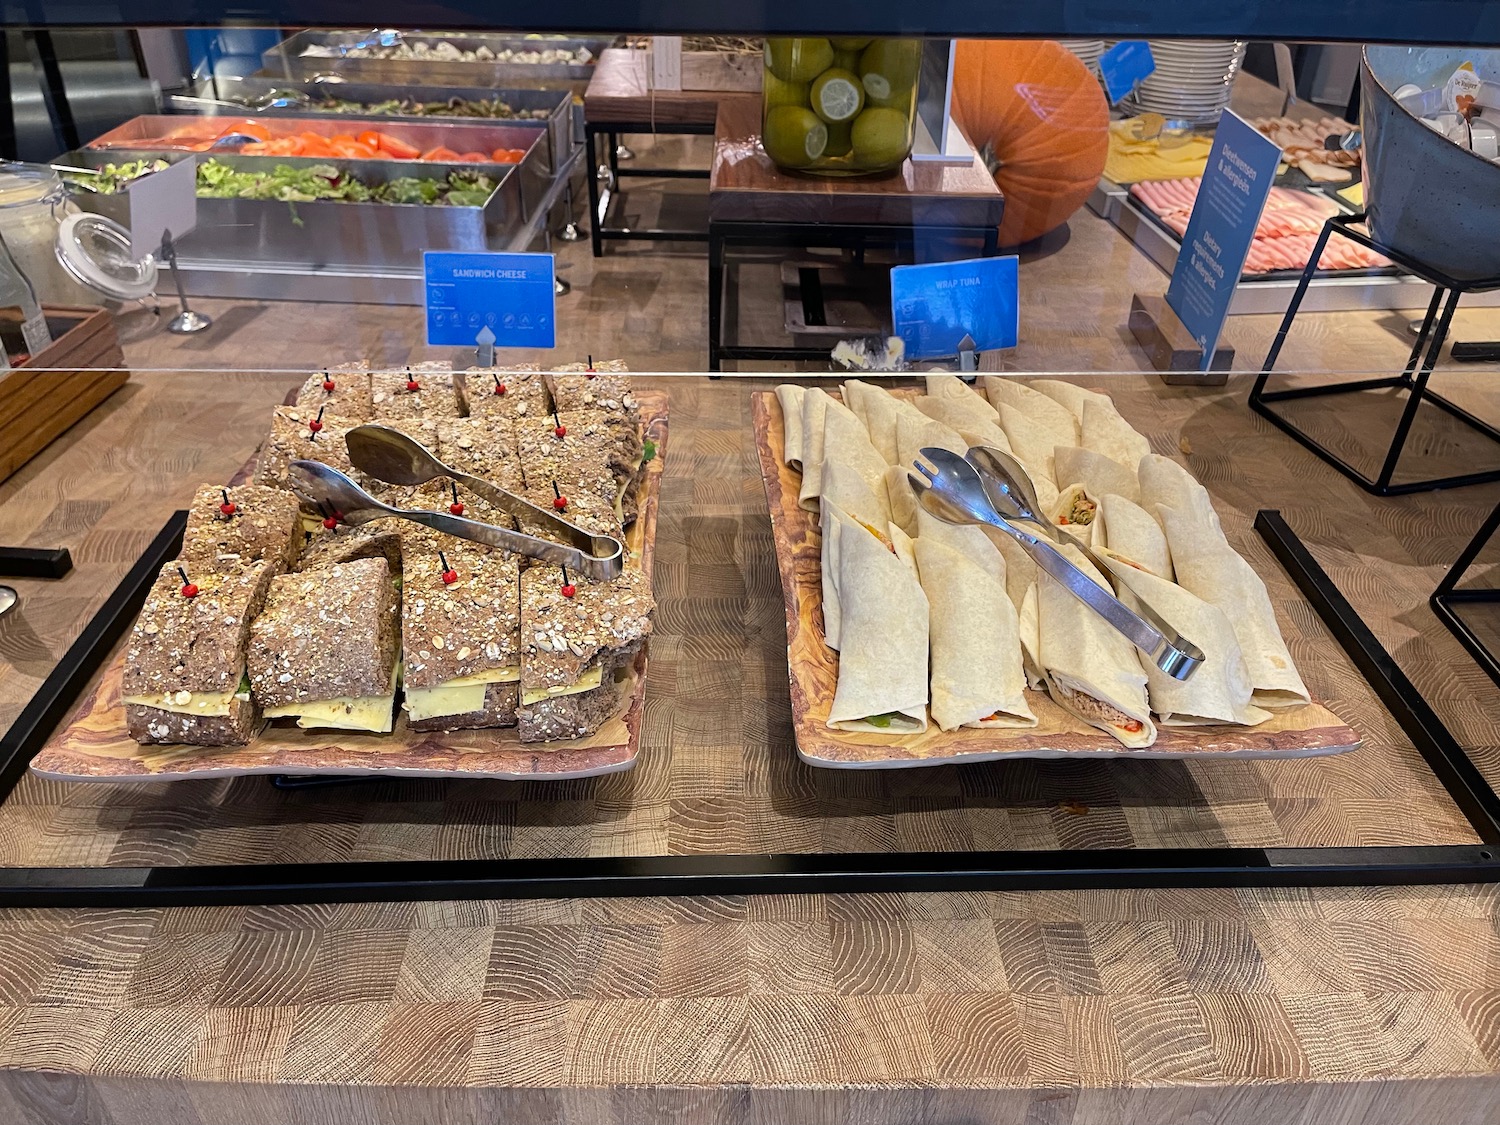 a plate of sandwiches and burritos on a glass case